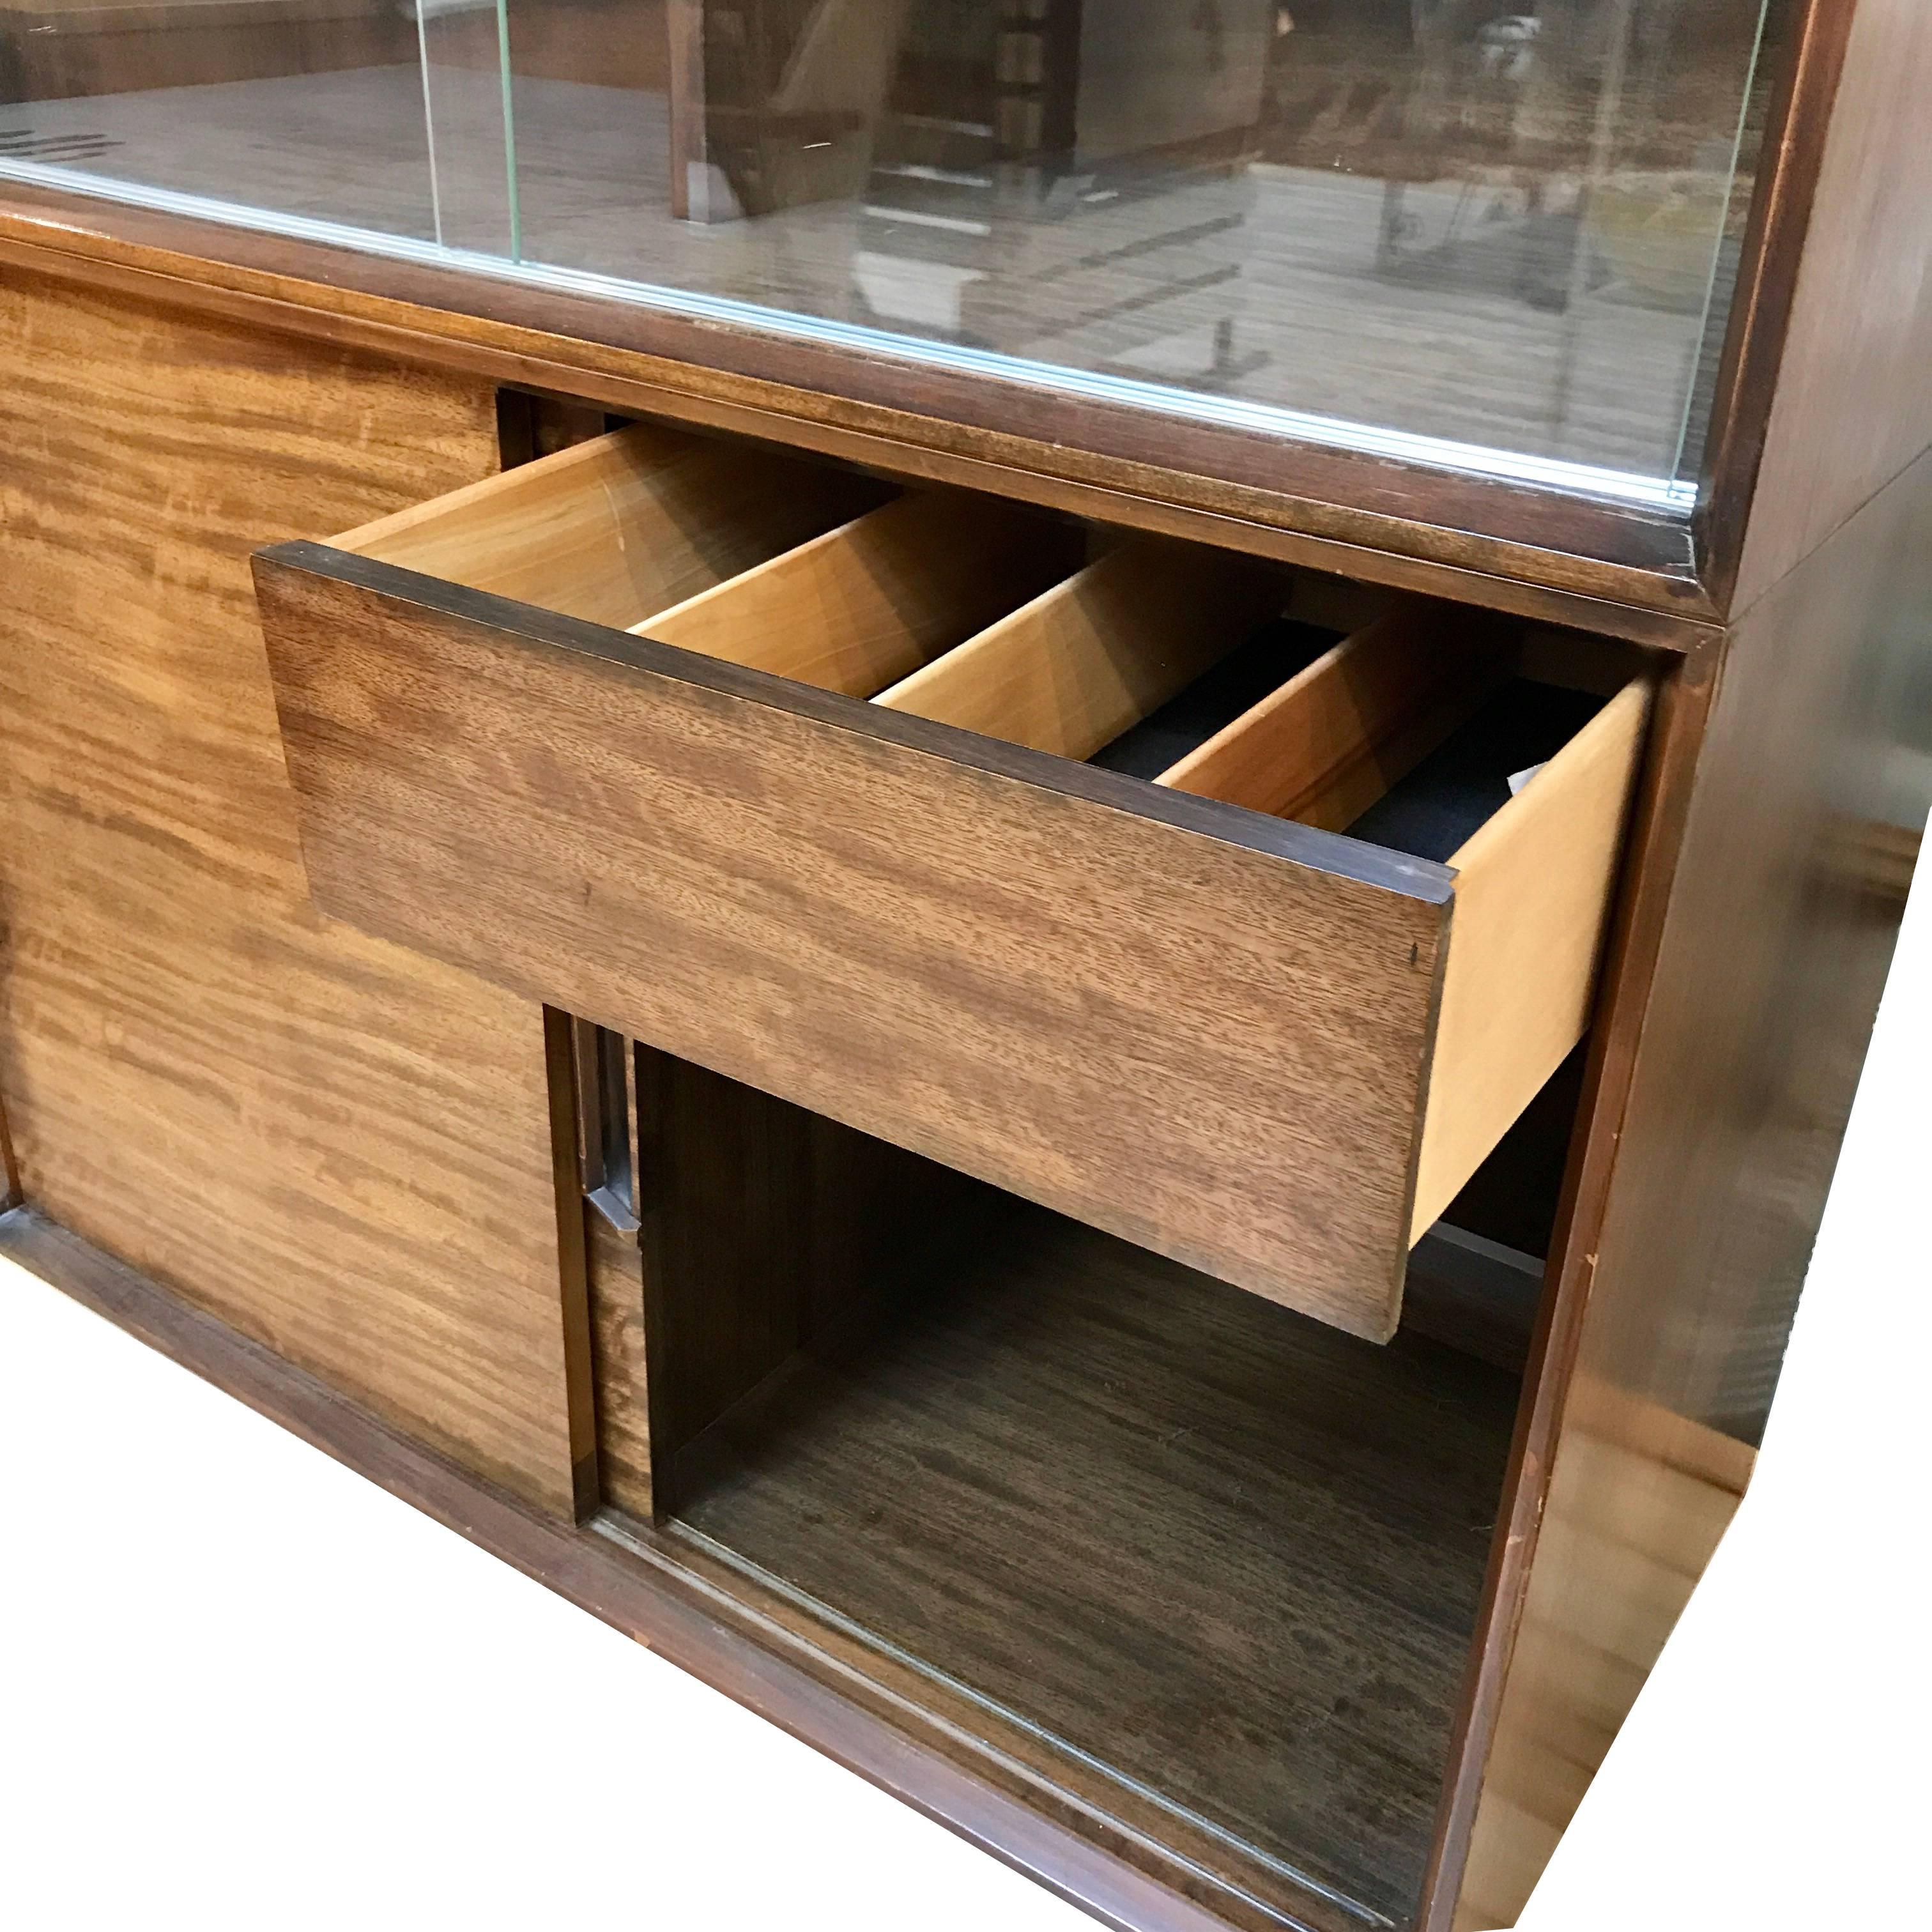 Mid-20th Century 1950s Milo Baughman for Drexel Perspective Mindoro Wood China Hutch For Sale